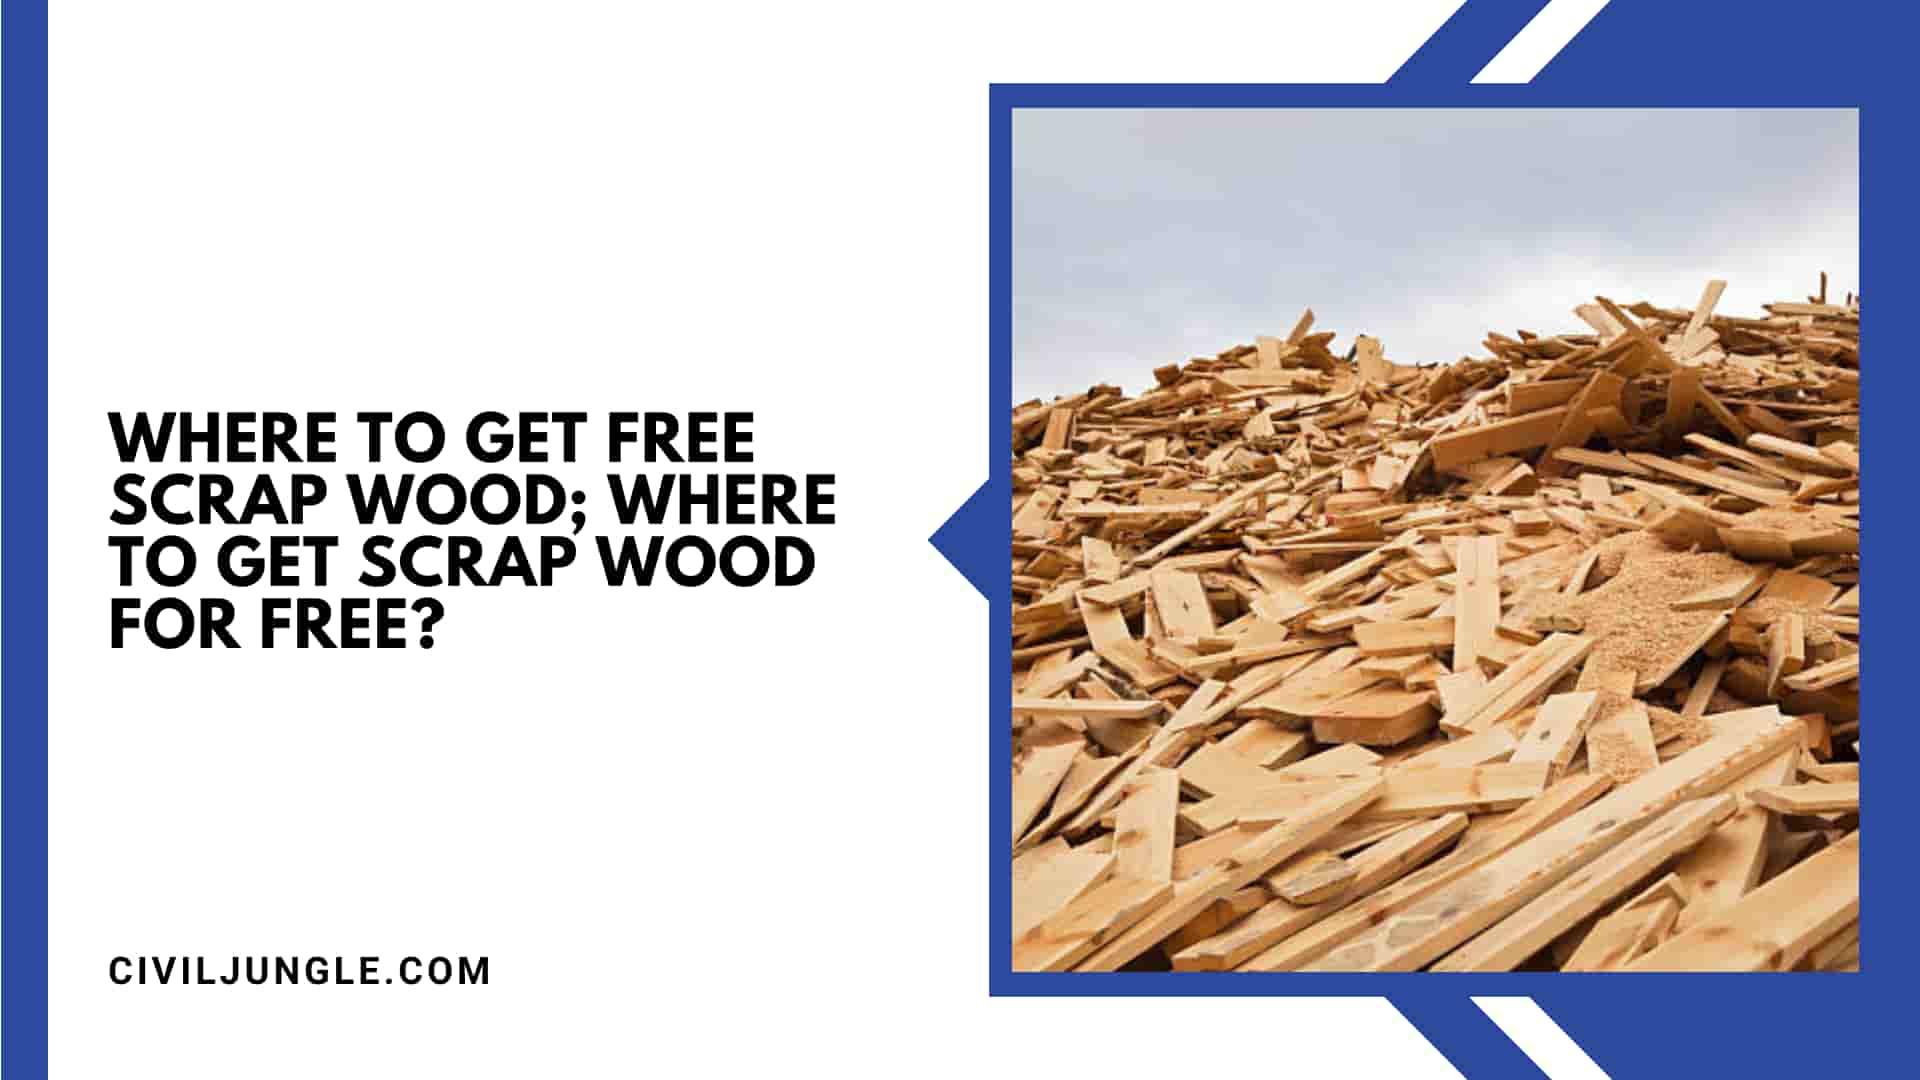 Where to Get Free Scrap Wood; Where to Get Scrap Wood for Free?